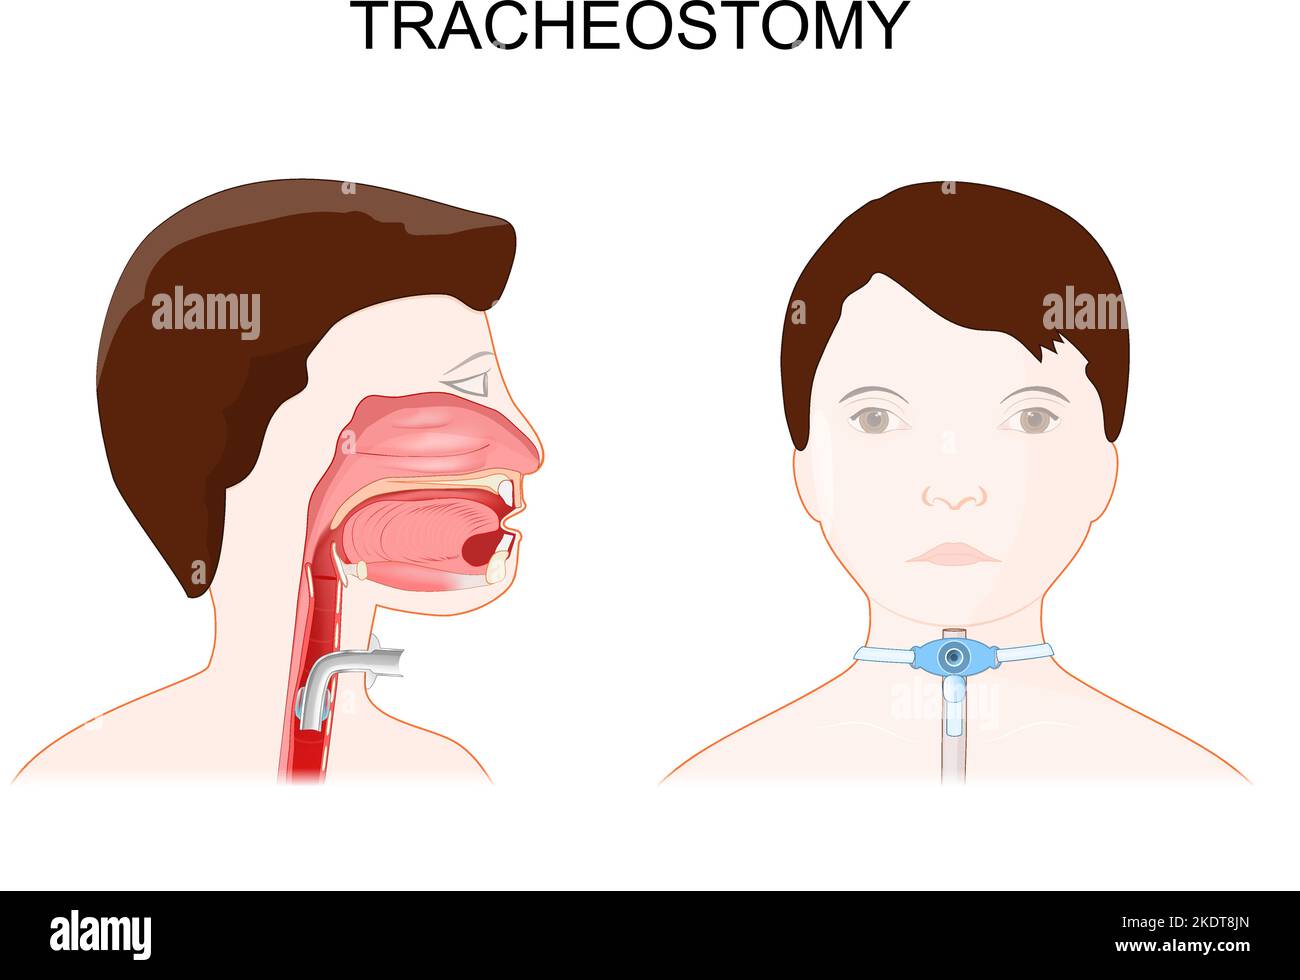 Tracheotomy. side view of the neck and placement of a tracheostomy tube in the trachea. external view of a patient with a tracheostomy in windpipe. Stock Vector